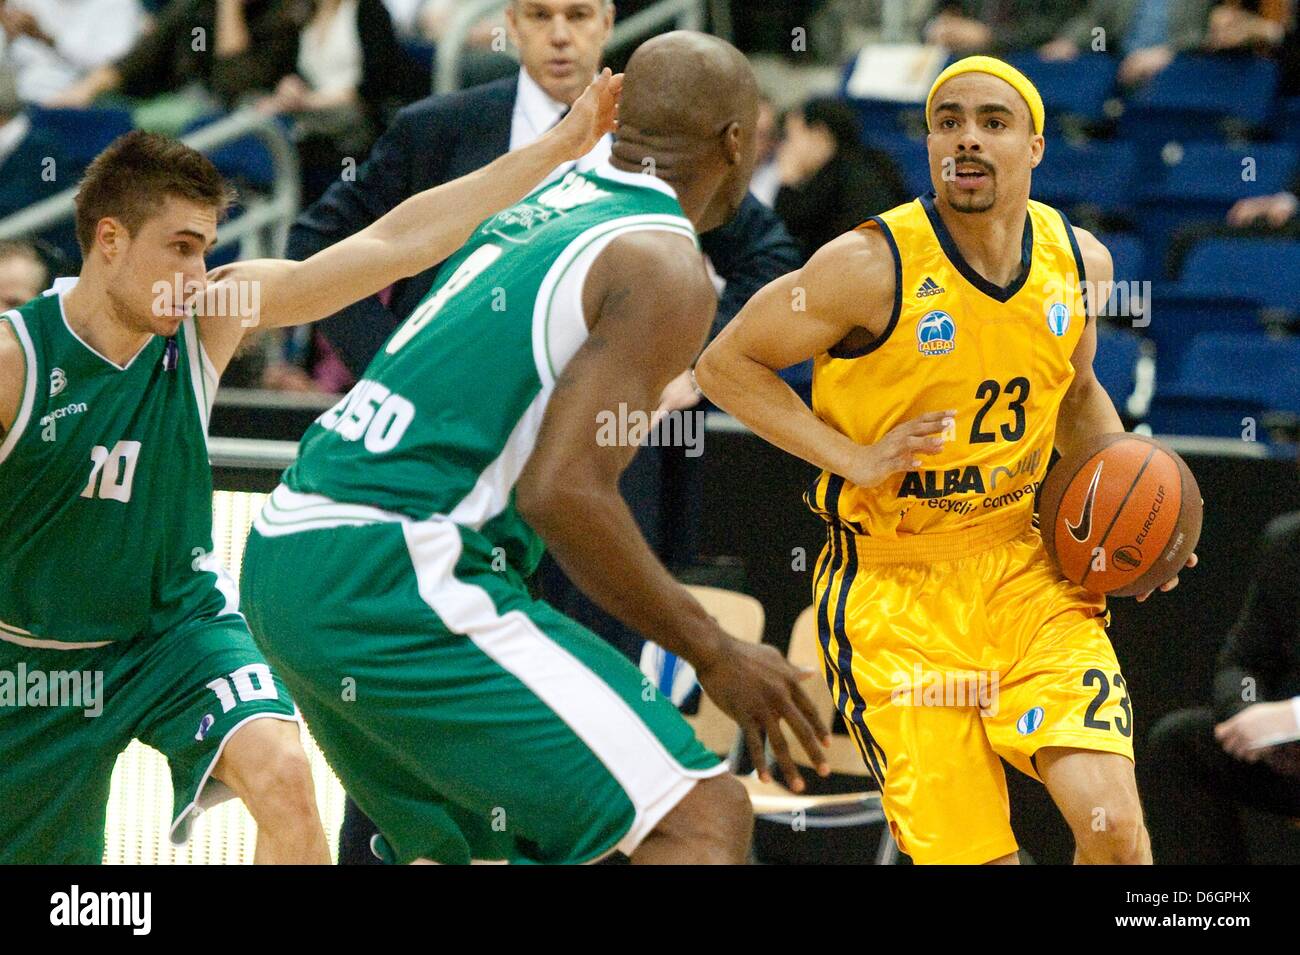 Berlin's DaShaun Wood (R) guards the ball against Benetton's Andrea De  Nicolao (L) and Marcus Goree during the basketball Eurocup match at the  o2World Arena in Berlin, Germany, 21 February 2012. Photo: